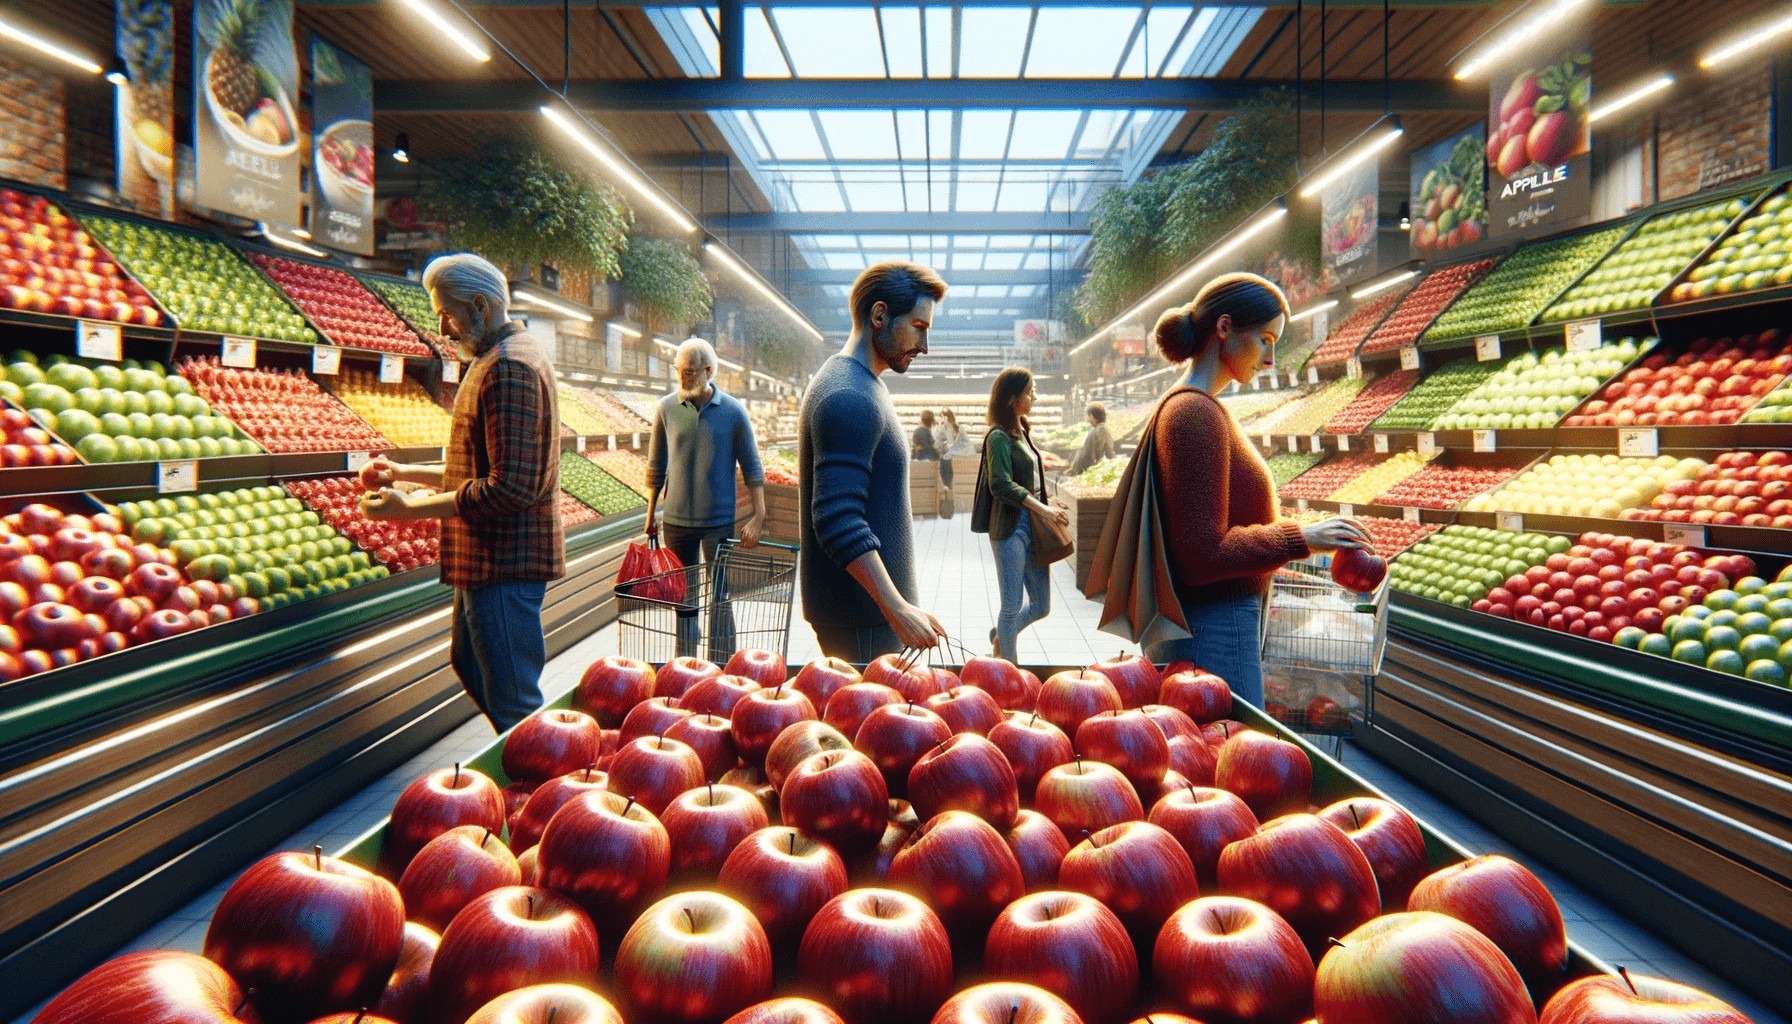 Shoppers selecting fresh produce at a Kroger grocery store, with a focus on the vibrant apple display under the bright store lighting.